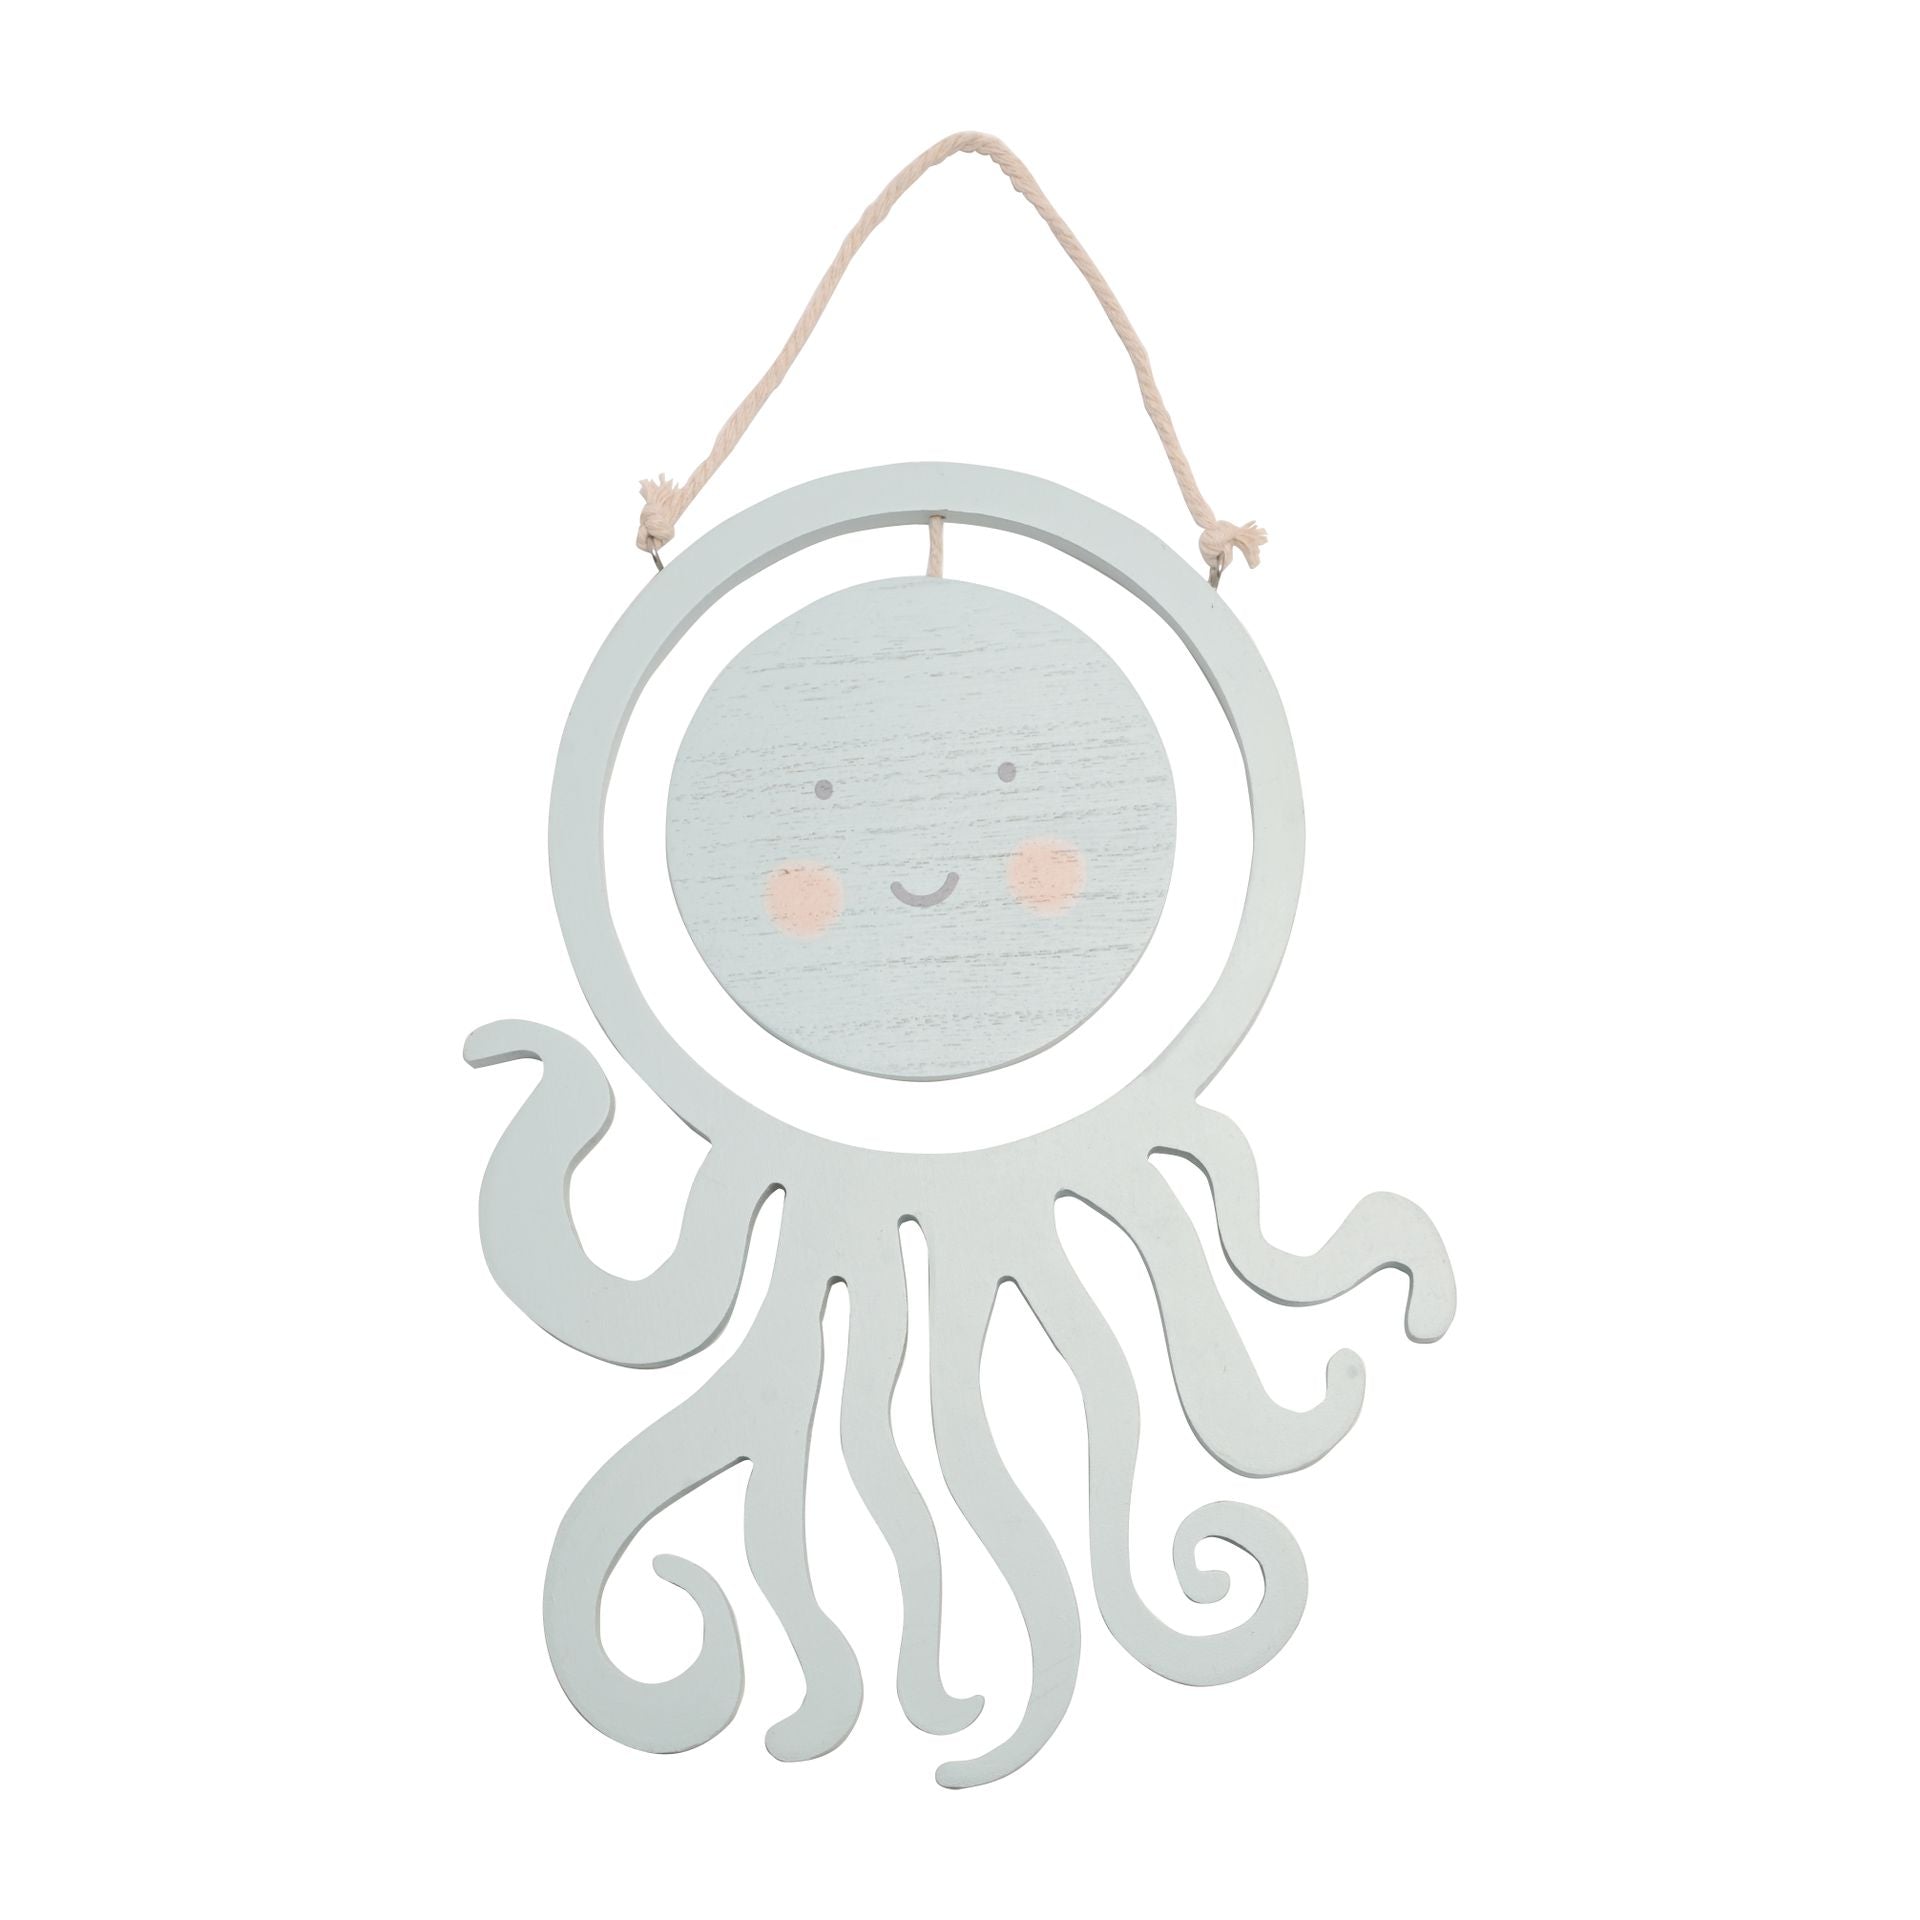 An adorable hanging octopus. The wooden ring wall display features a light blue octopus design, with a matching round plaque inside featuring ‘Let’s Protect Our Seas’ written in white capital lettering. Complete with an attached rope hanger, this plaque can be hung anywhere.